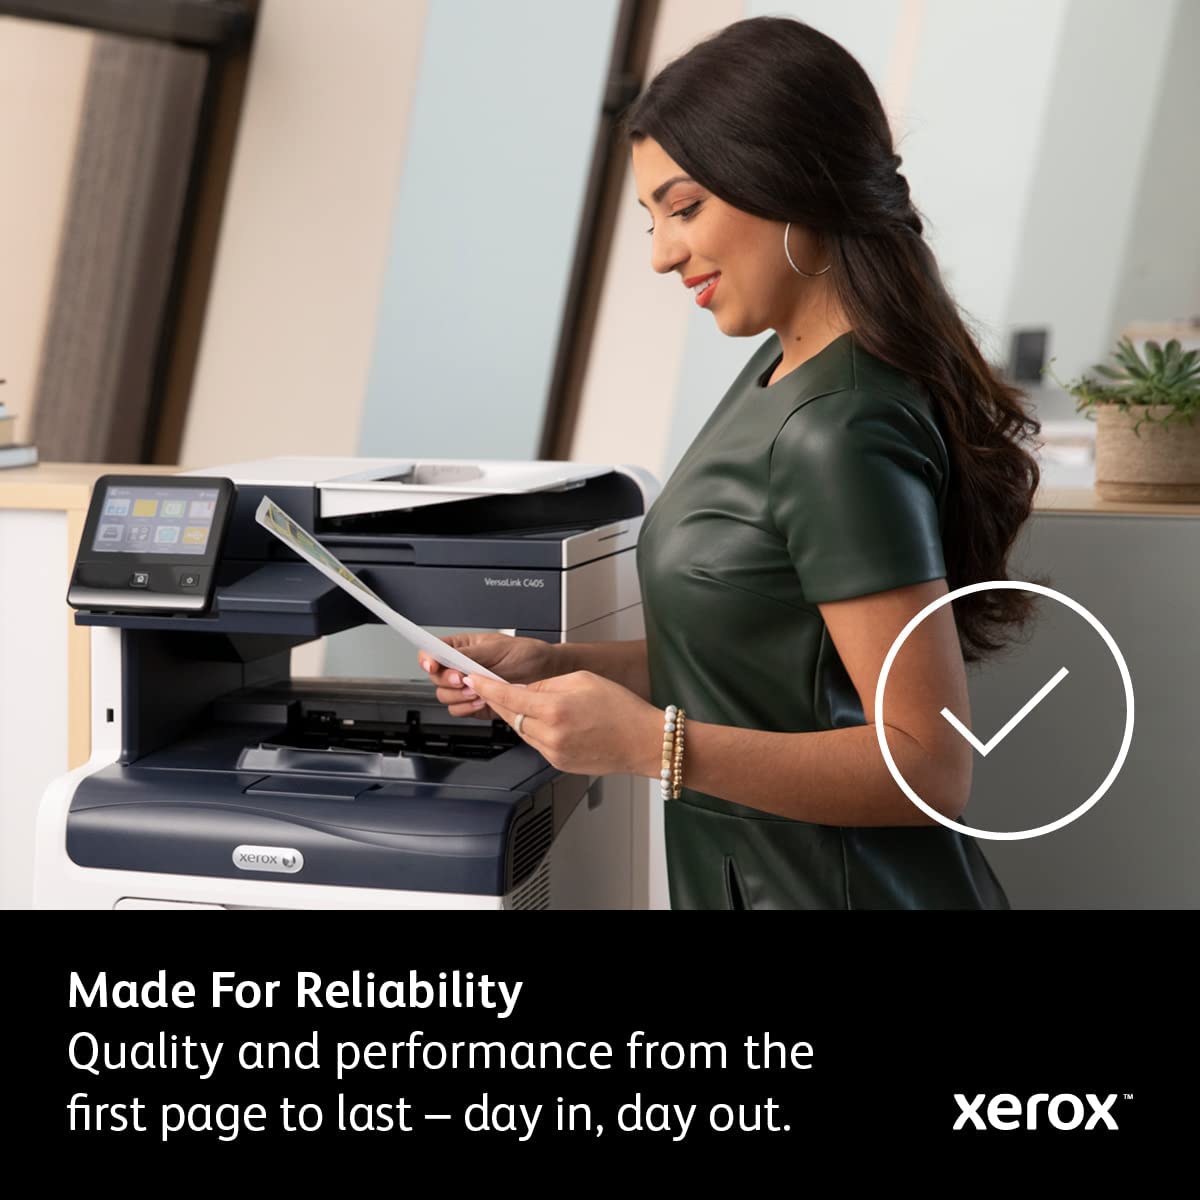 Xerox Phaser 6280 Cyan High Capacity Toner Cartridge (5,900 Pages) - 106R01392